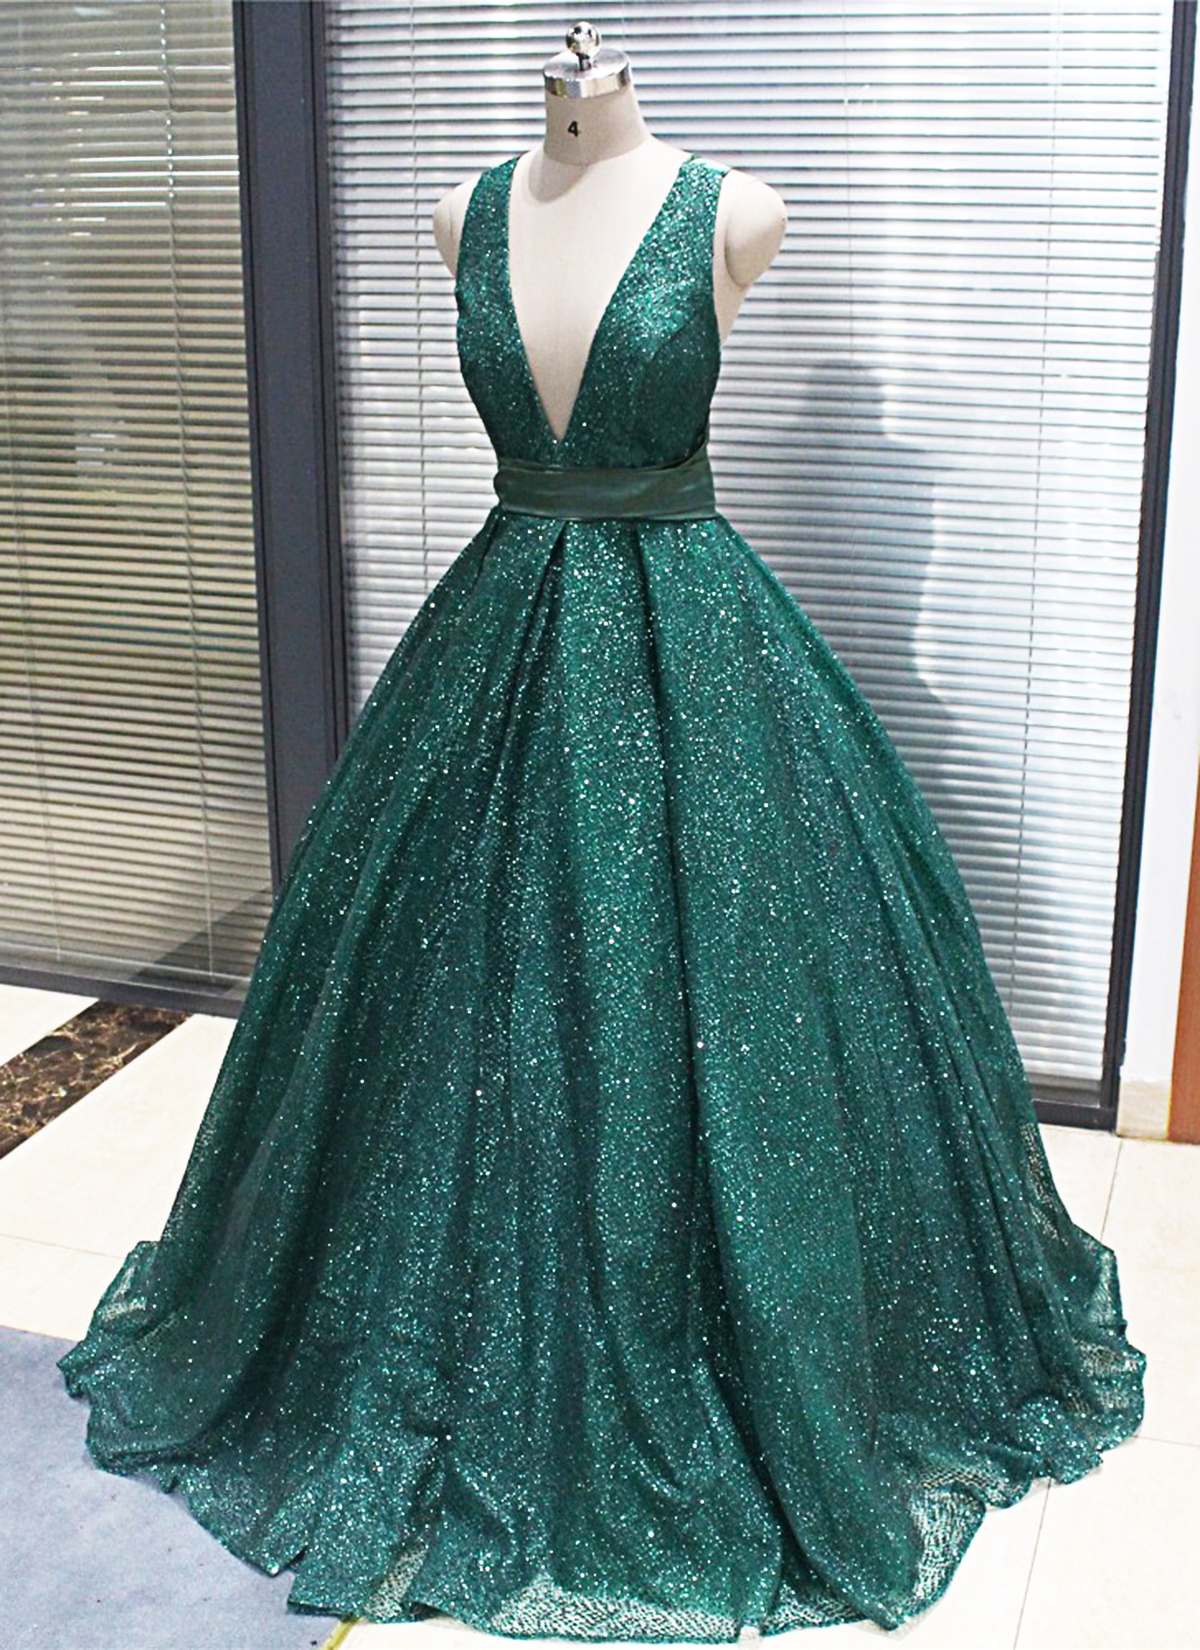 Style Sparkly Dark Green Sequined Long V Neck Evening Dress, Puffy Party Dress, Floor Length Sleeveless Sequins Prom Gown P355